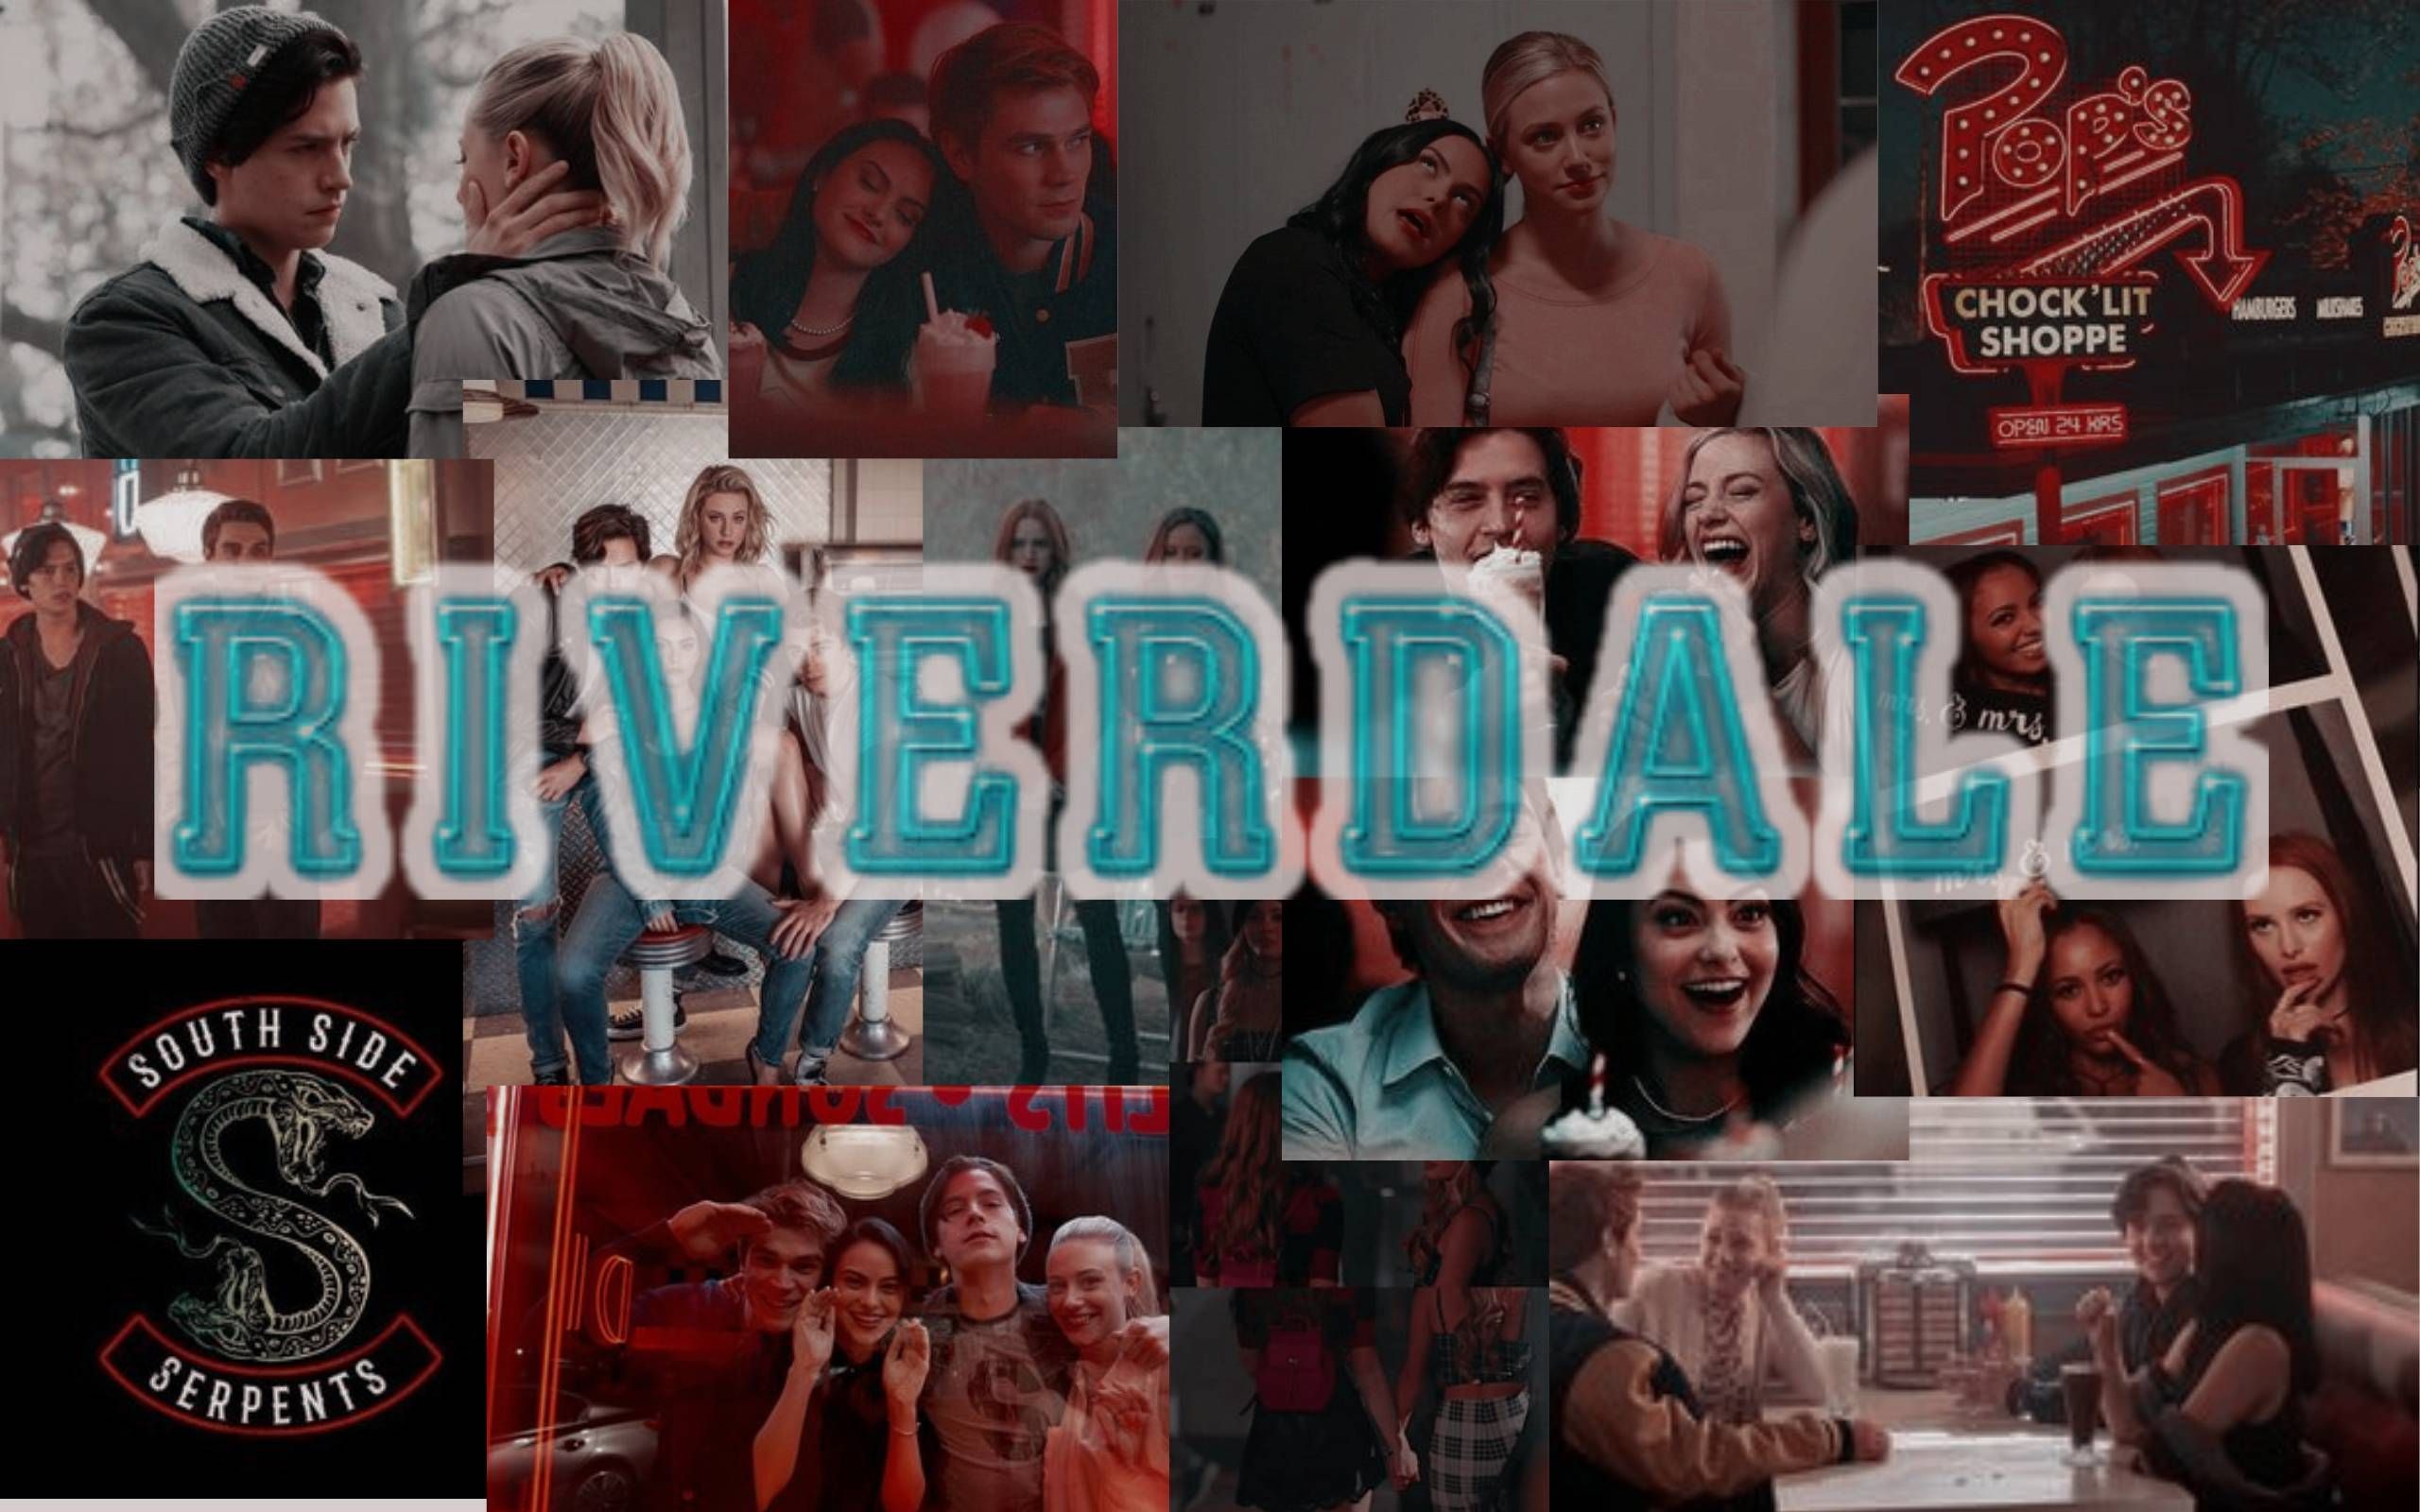 A collage of Riverdale characters and images - Riverdale